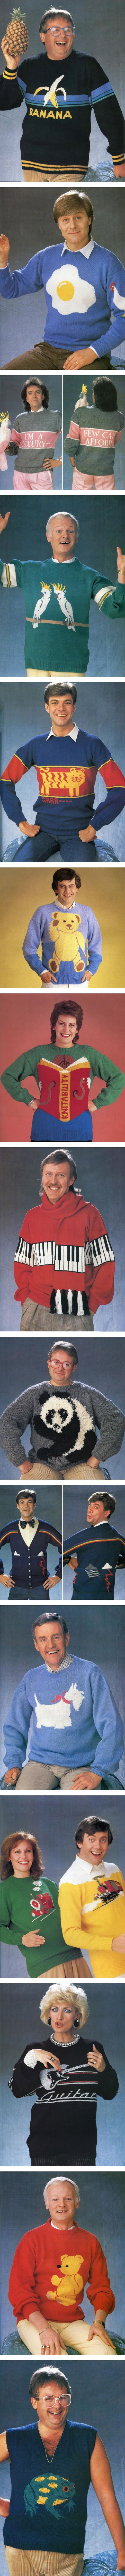 Ugly sweaters from the 1980s